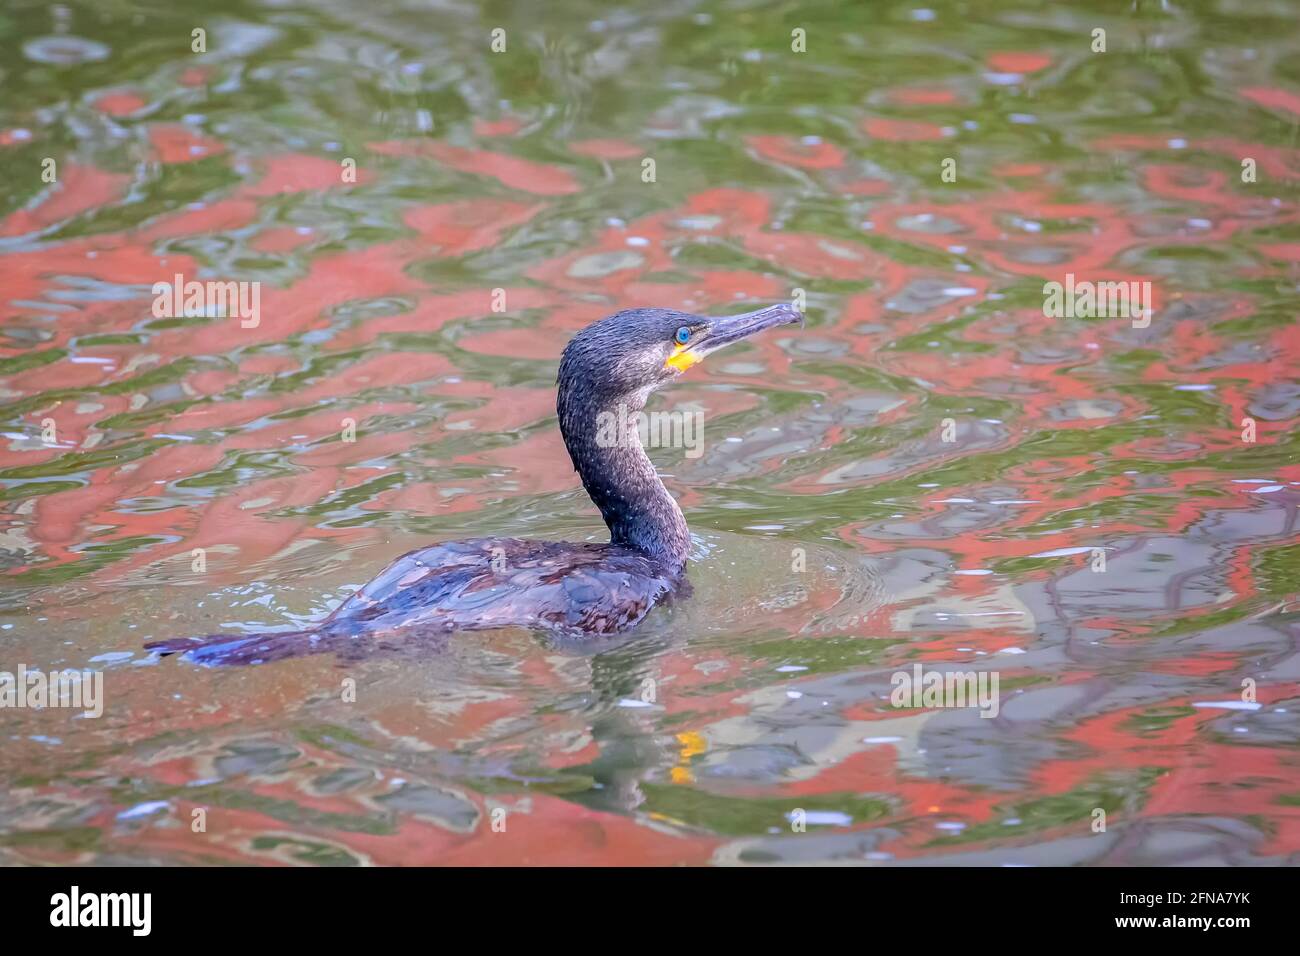 Close up of a European Cormorant swimming in river with vibrant red rippling reflections Stock Photo